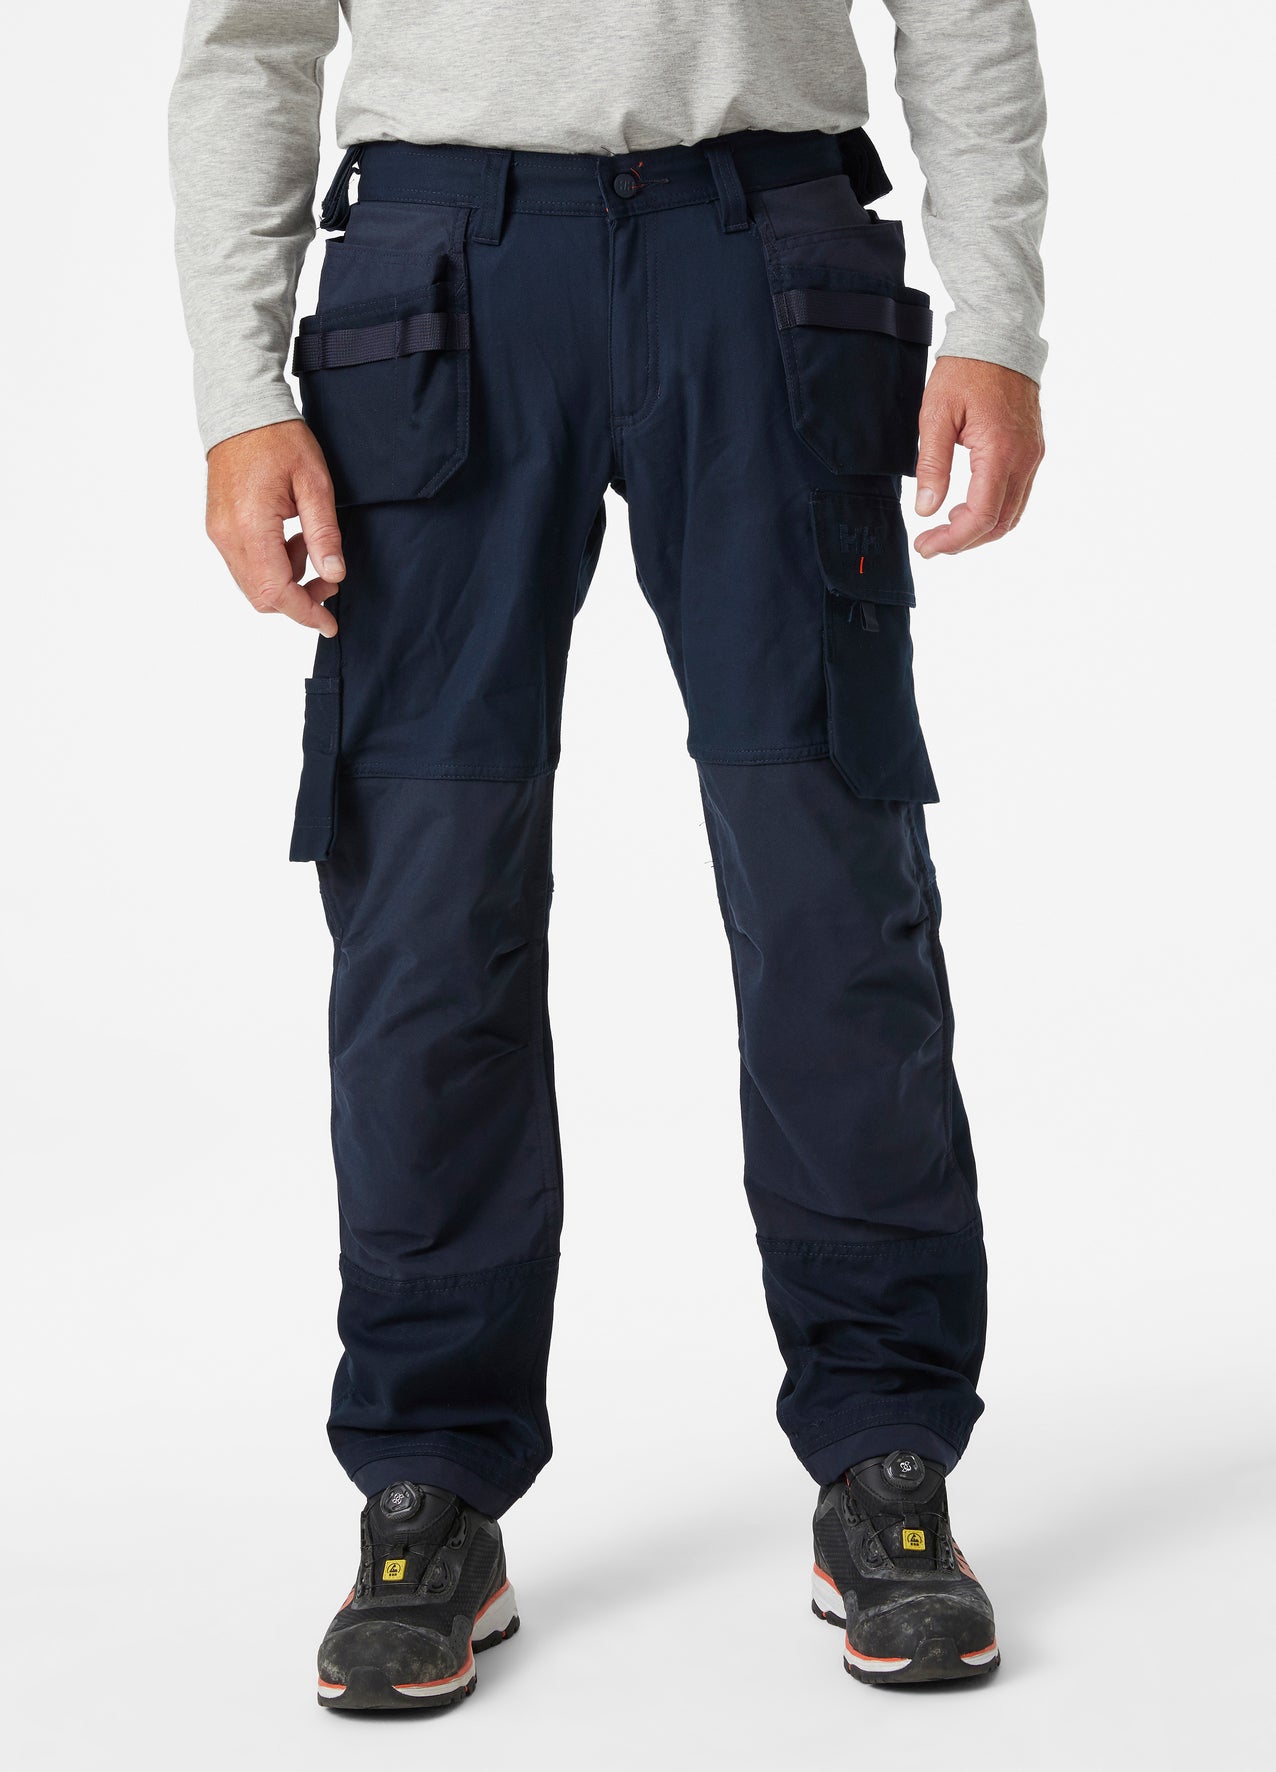 Helly Hansen Oxford Construction Trousers - Navy